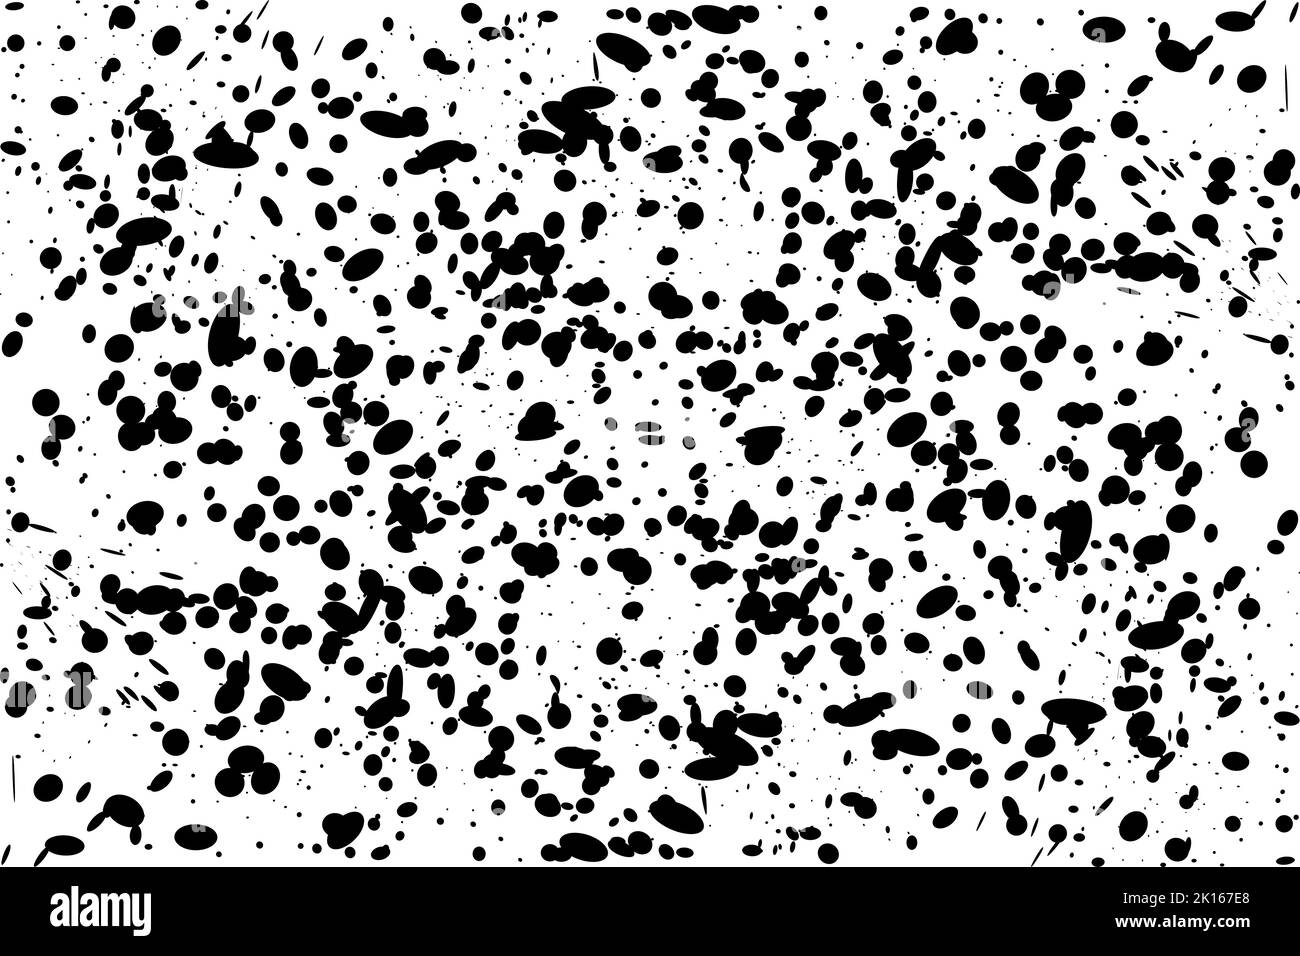 Black and white Abstract background made of paint droplets, blots and splashes. Vector illustration Stock Vector